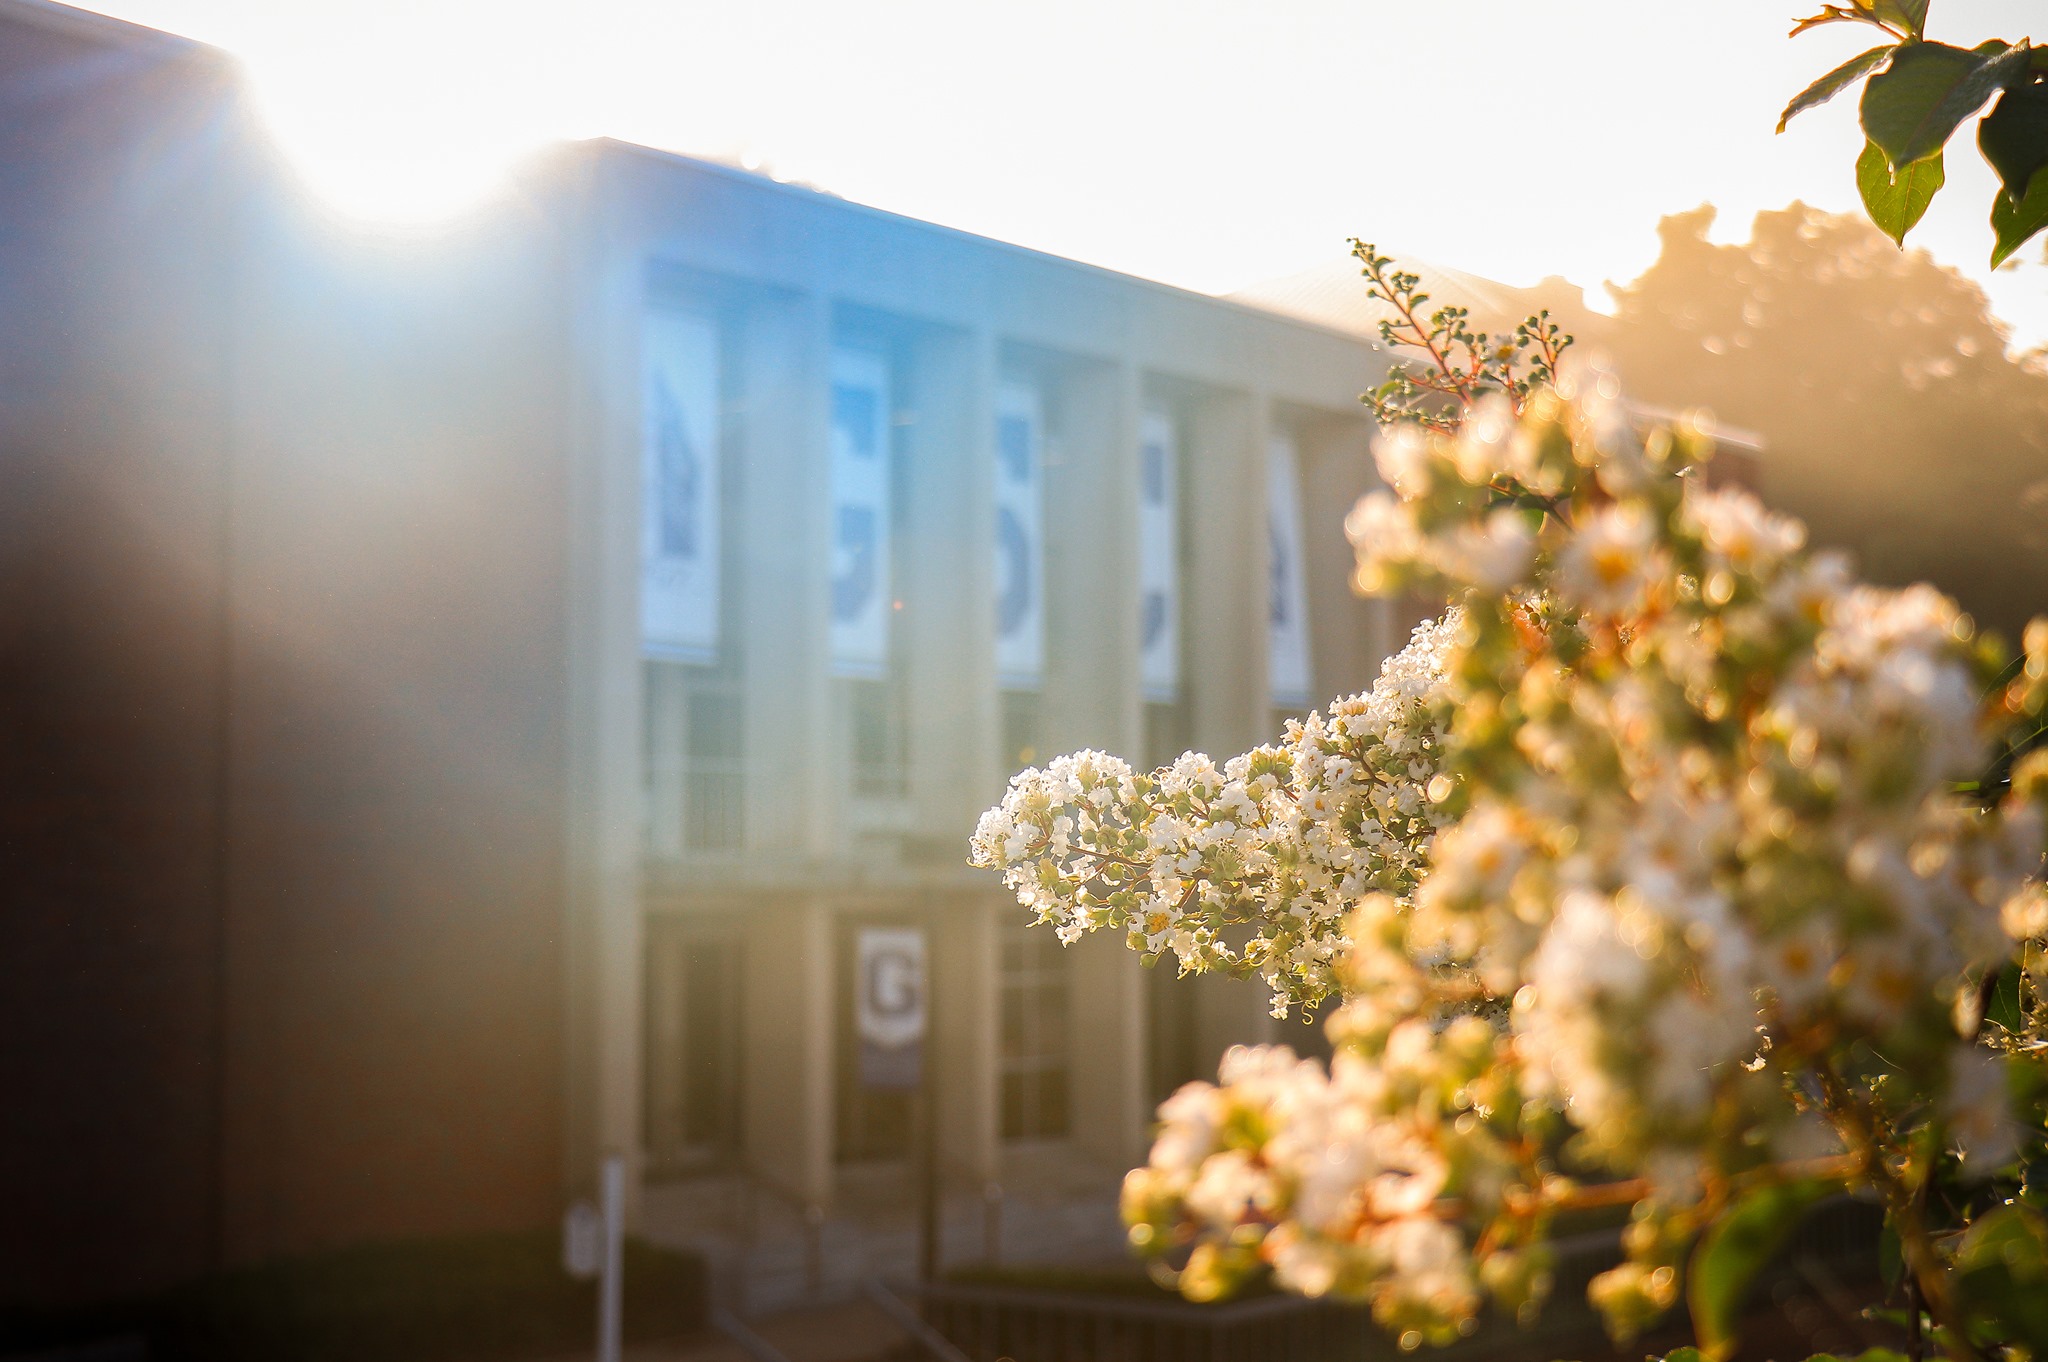 Soft green and white blossoms frame the Robert F. Kidd Library, which stands in the early morning light.